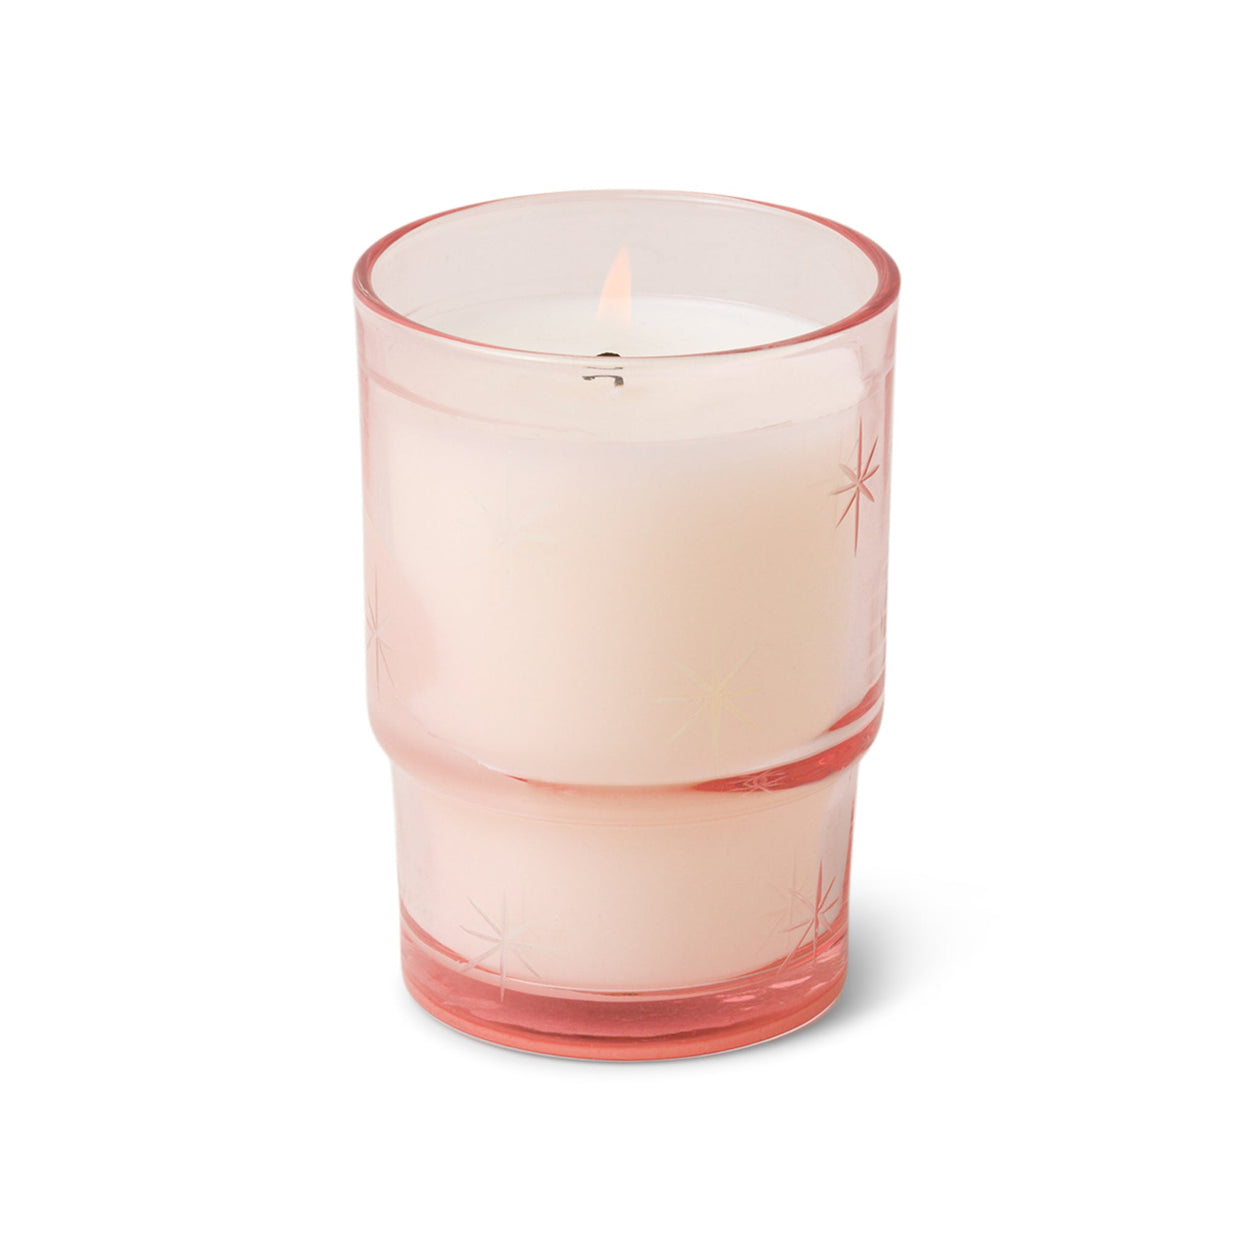 Noel 5.5 oz Etched Stars on Pink Transparent Glass Candle - Cranberry Rose